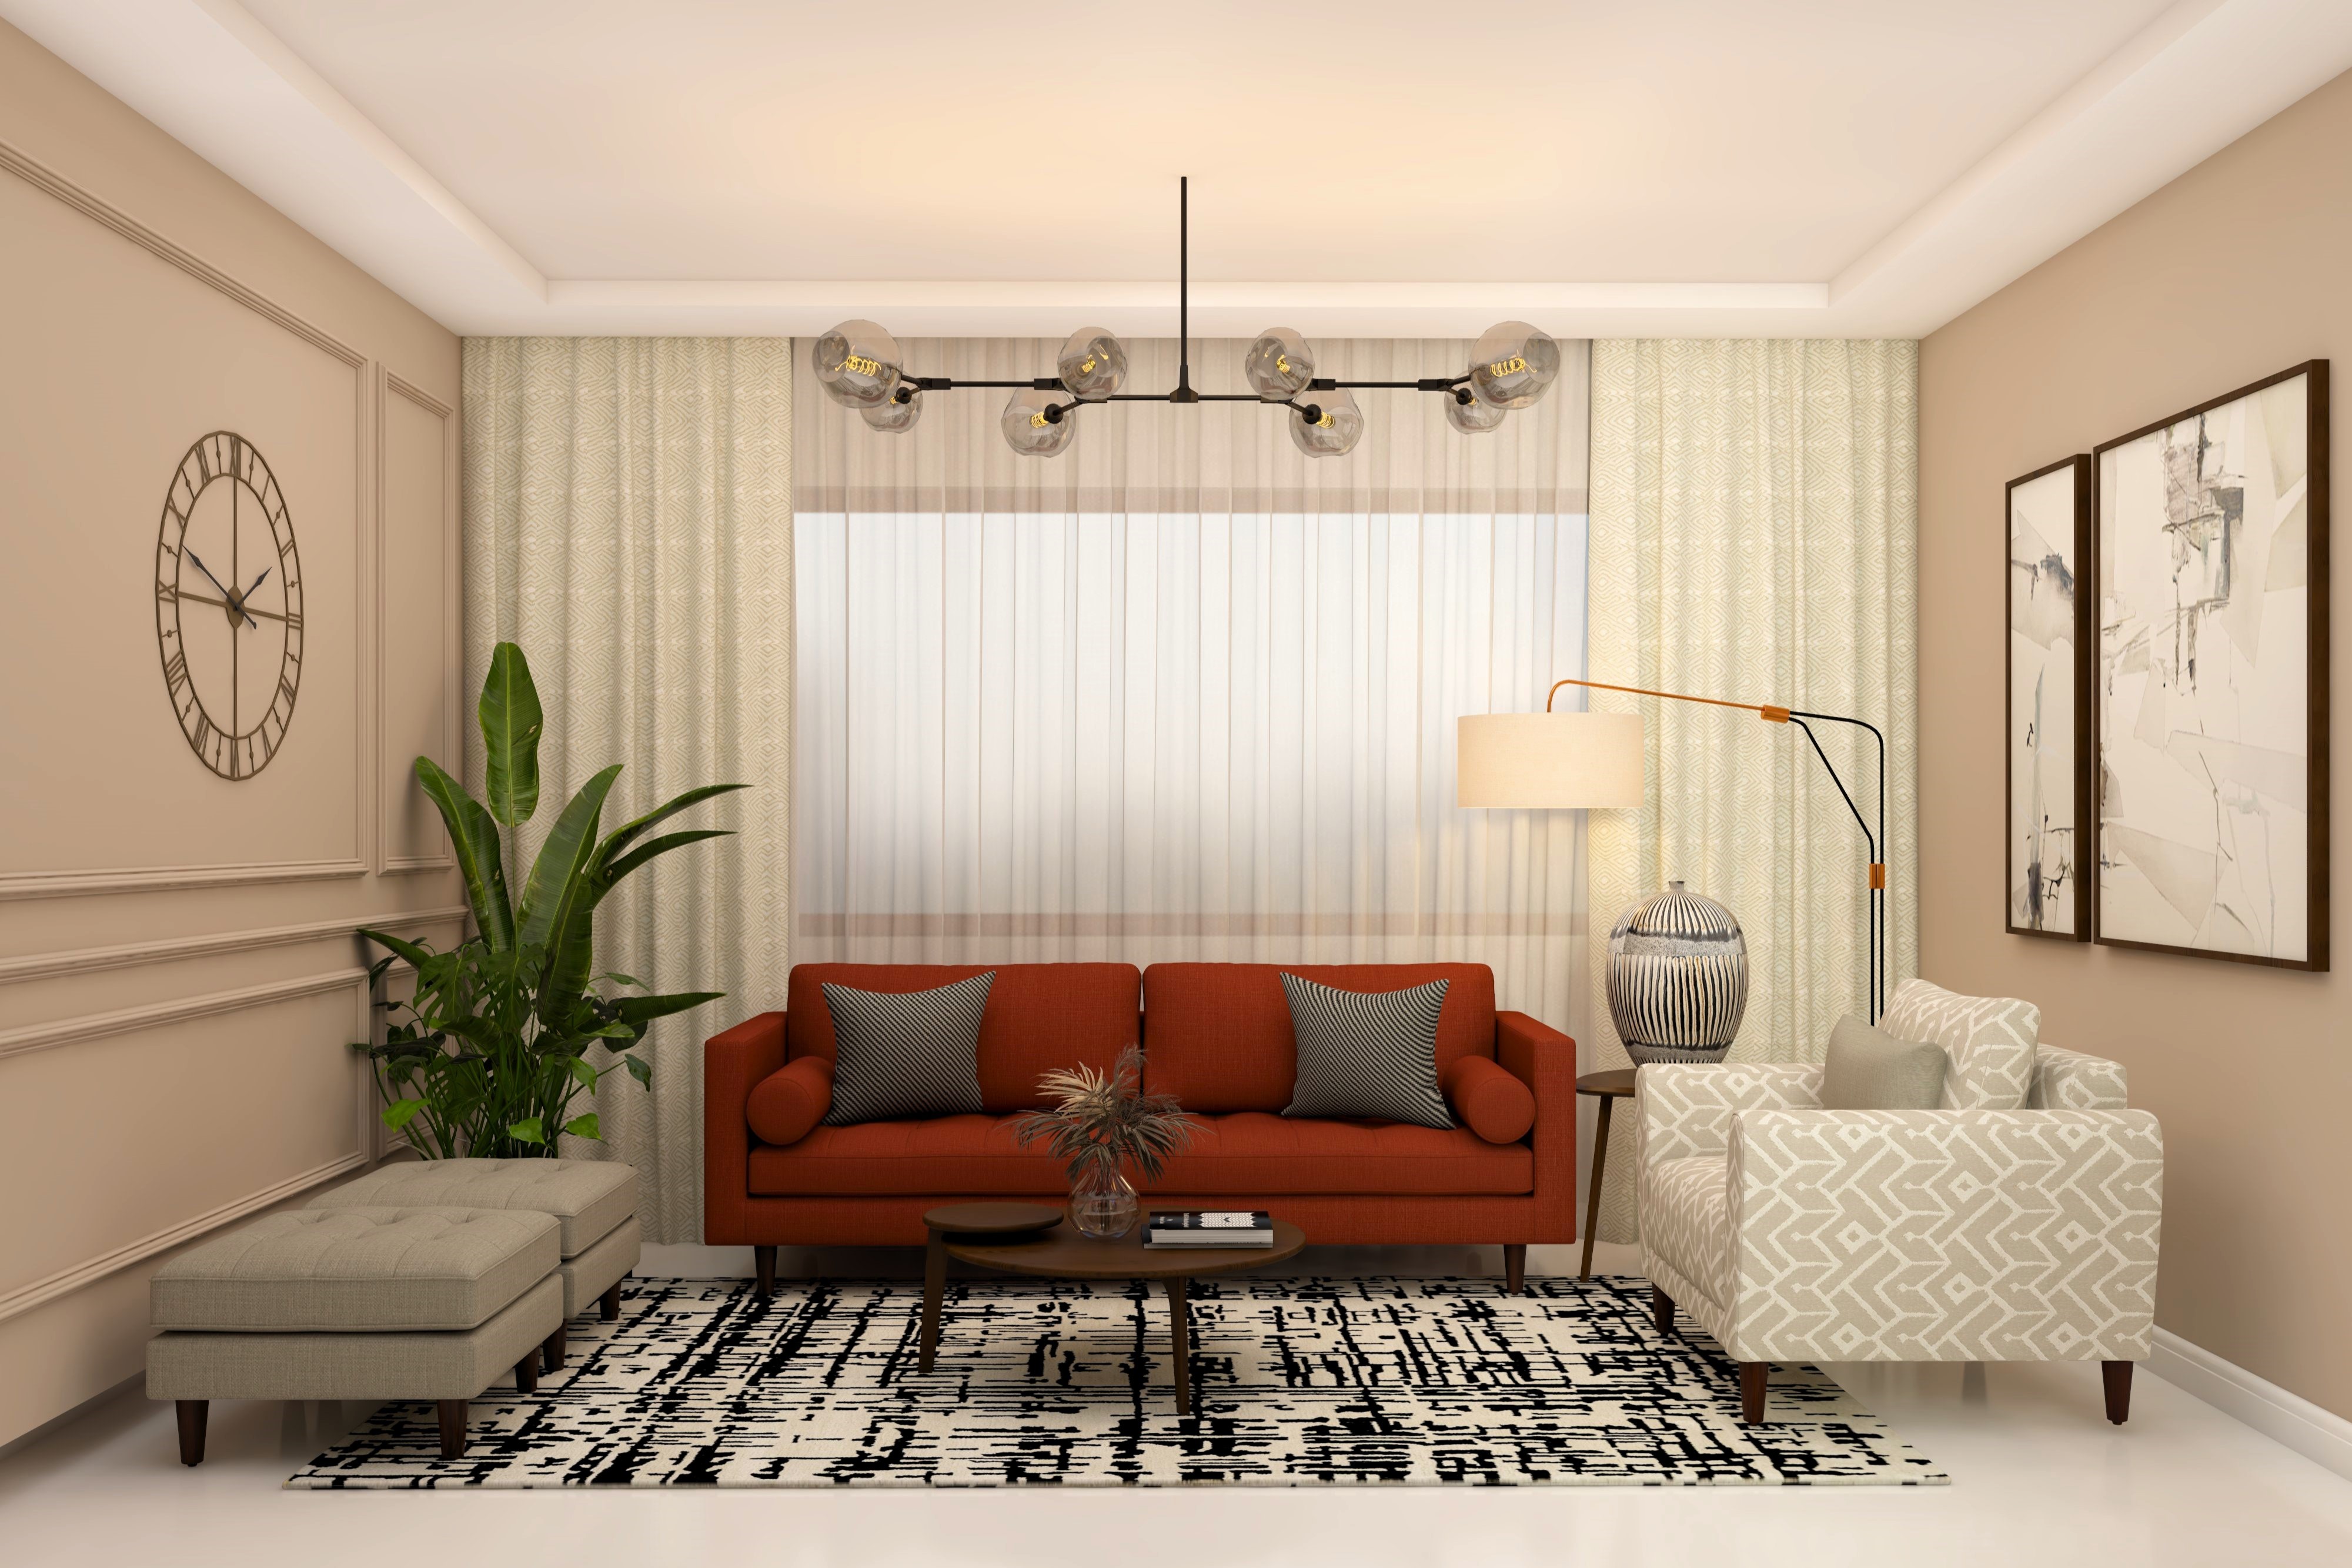 Light colored living room with red 3-seater sofa and accent chair with printed upholstery